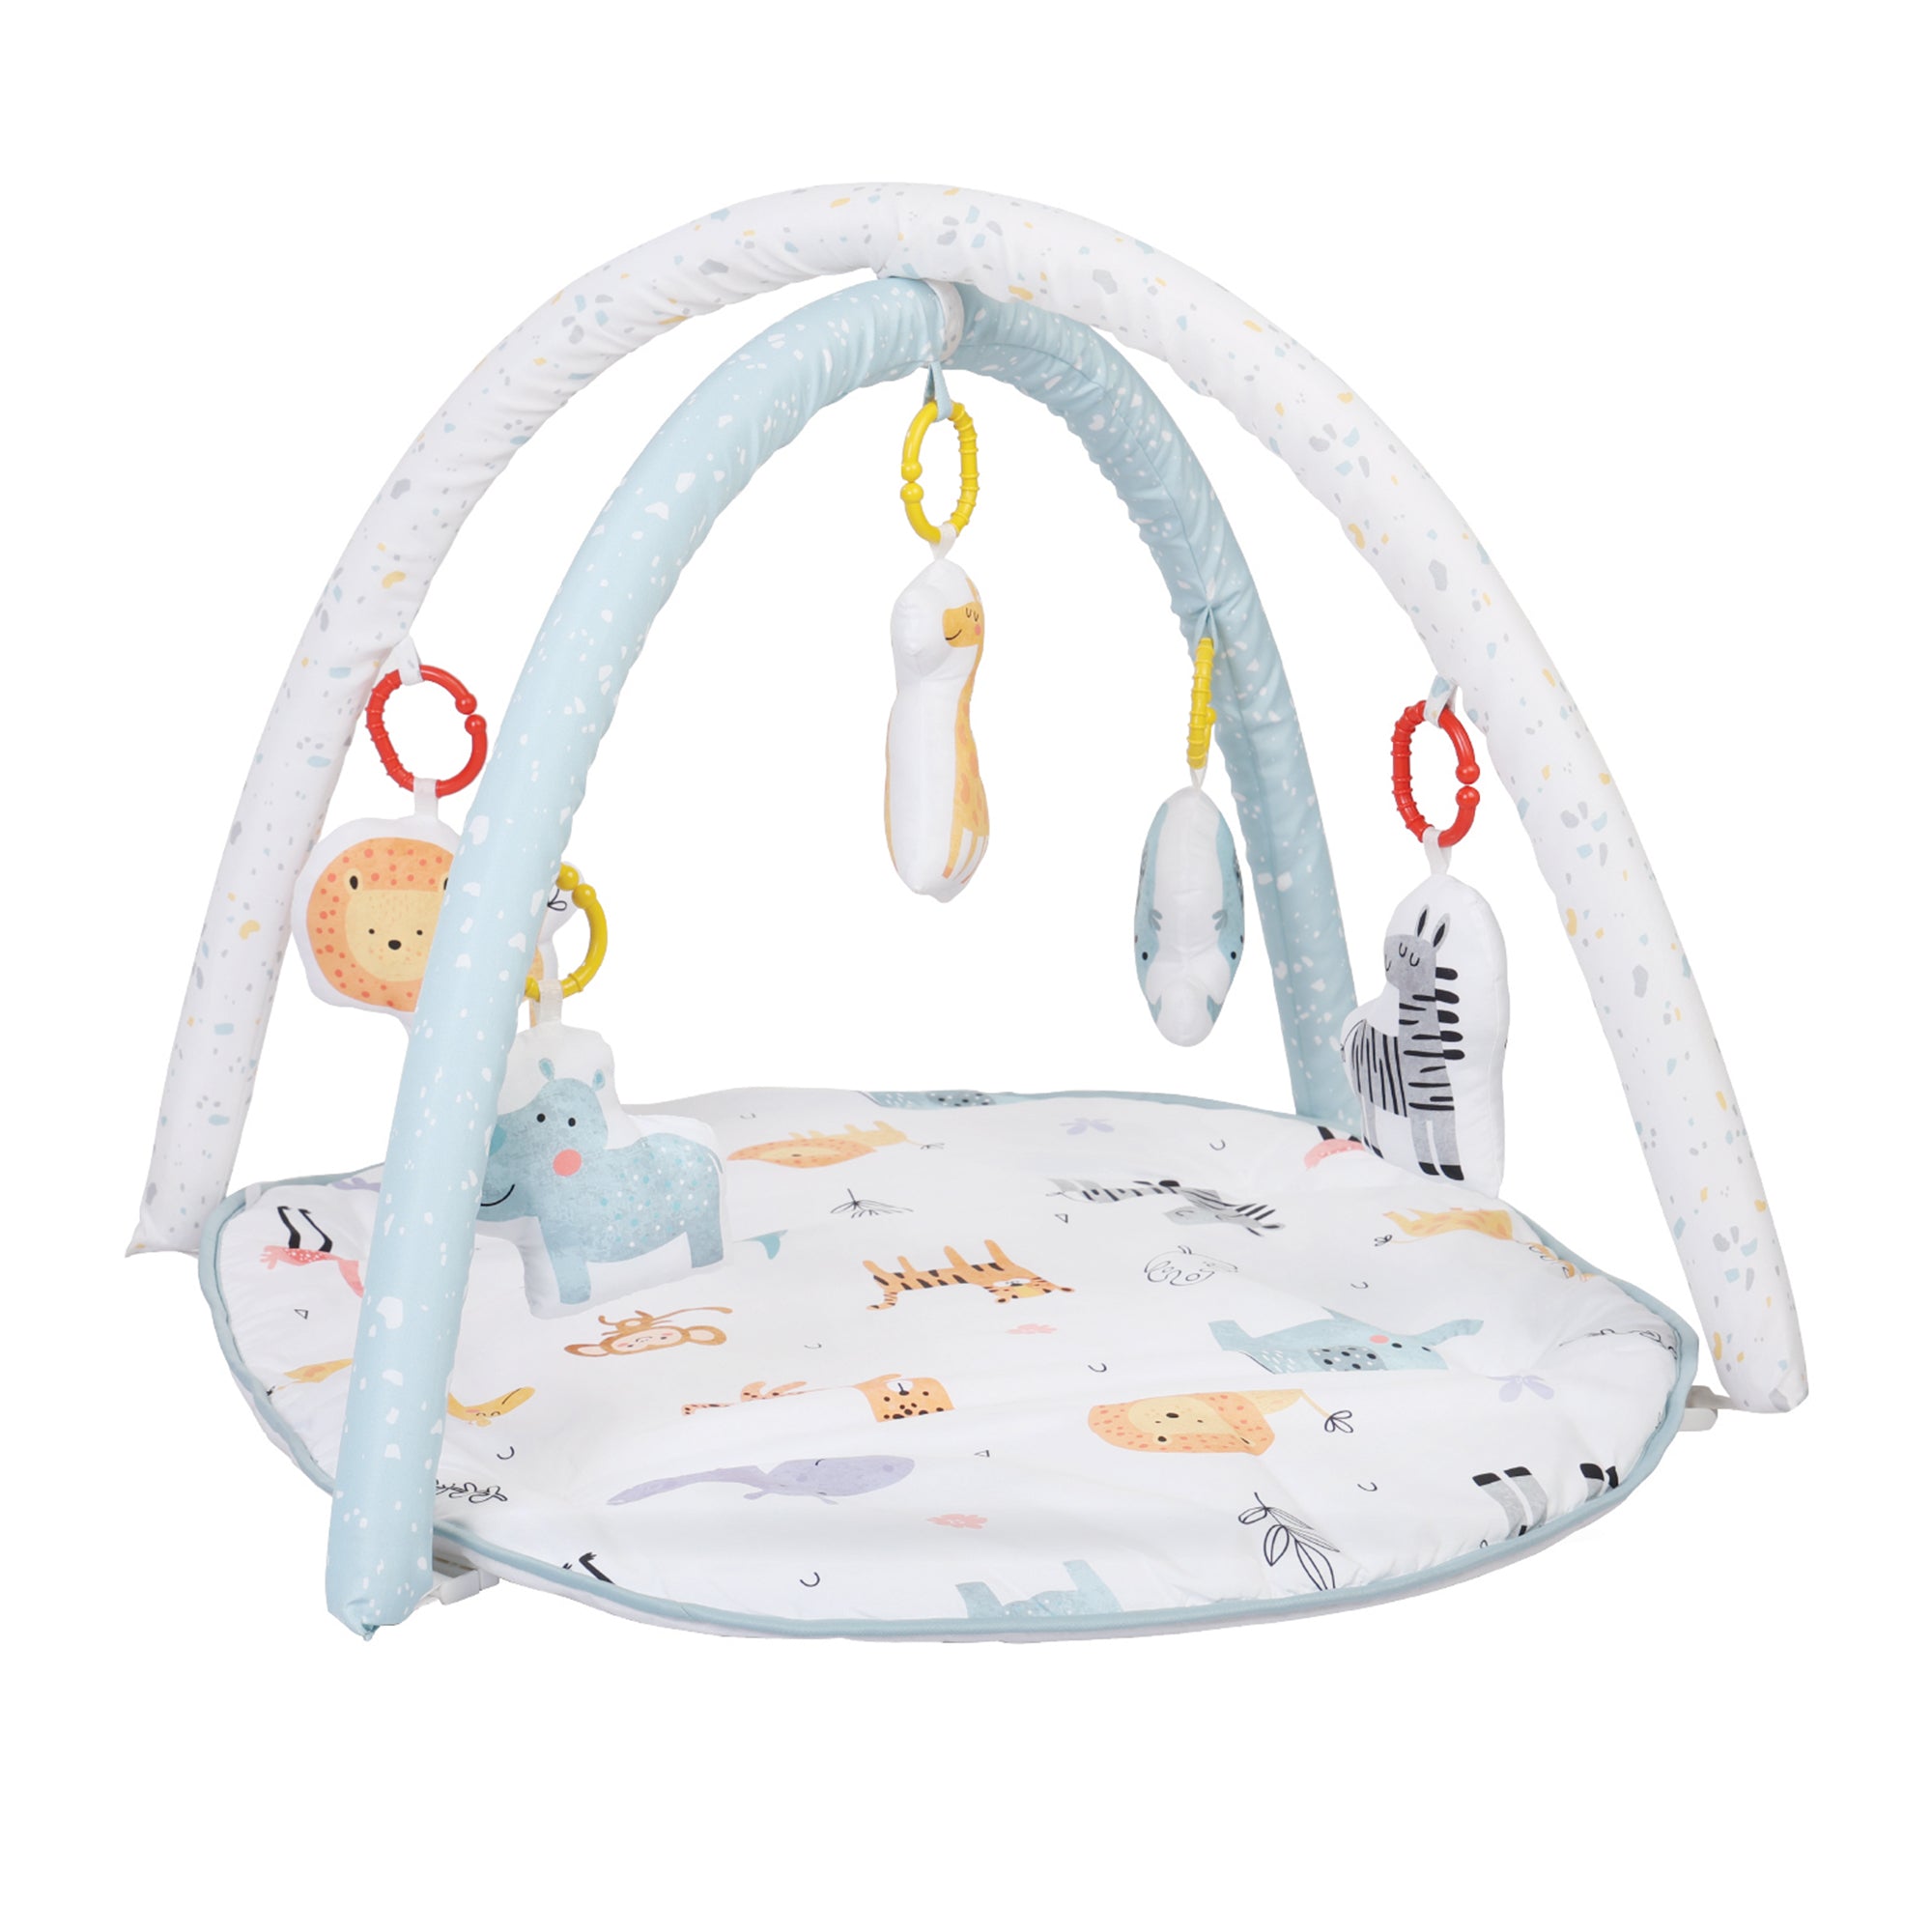 Nuluv Playgym - Jungle Birth to 12 Months Multicolor